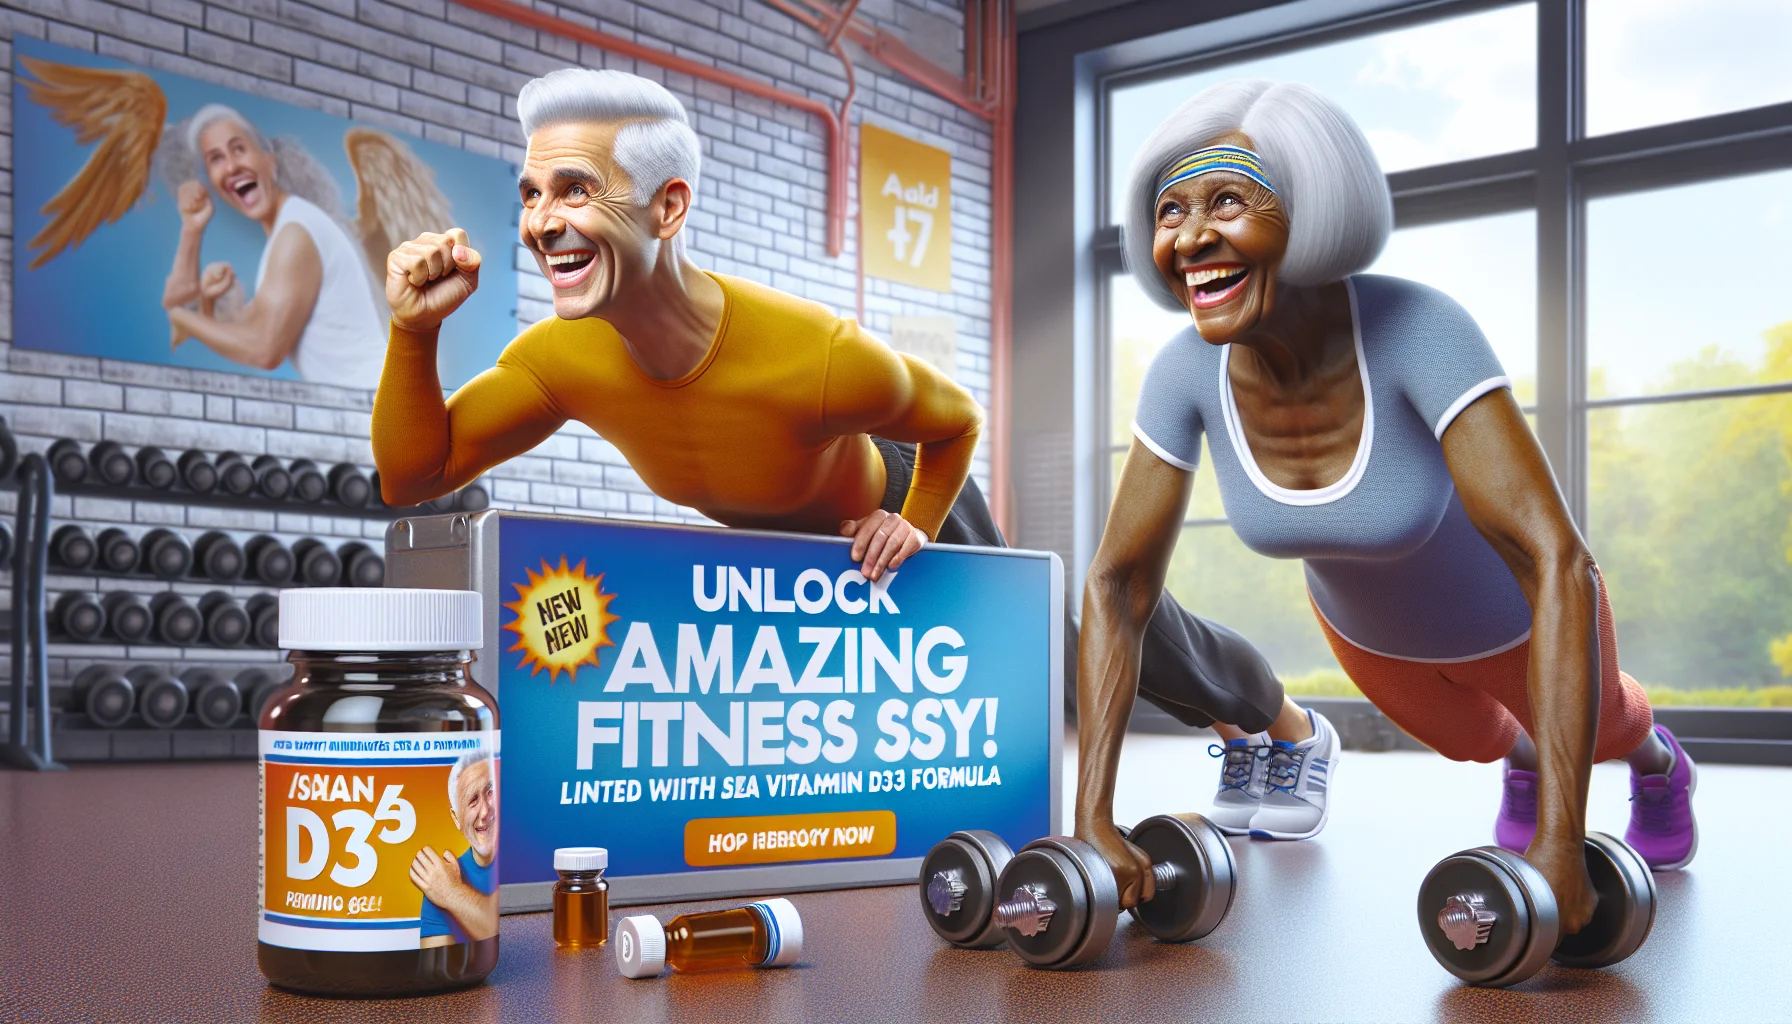 Create a humorously exaggerated illustration showing the concept of slow aging and enhanced fitness linked with a fictional Sea Vitamin D3 formula. In this scene, an elderly Caucasian man and a middle-aged Black woman are laughing while exhibiting incredible fitness levels. The man is doing one-arm pushups with a smile on his face, while the woman is easily lifting heavy dumbbells. They both have youthful, glowing skin, contrasting their grey hair. The background is a bright, inviting gym with a banner that reads, 'Unlock Amazing Fitness with Sea D3!'. Make this scene light-hearted, encouraging viewers to exercise.